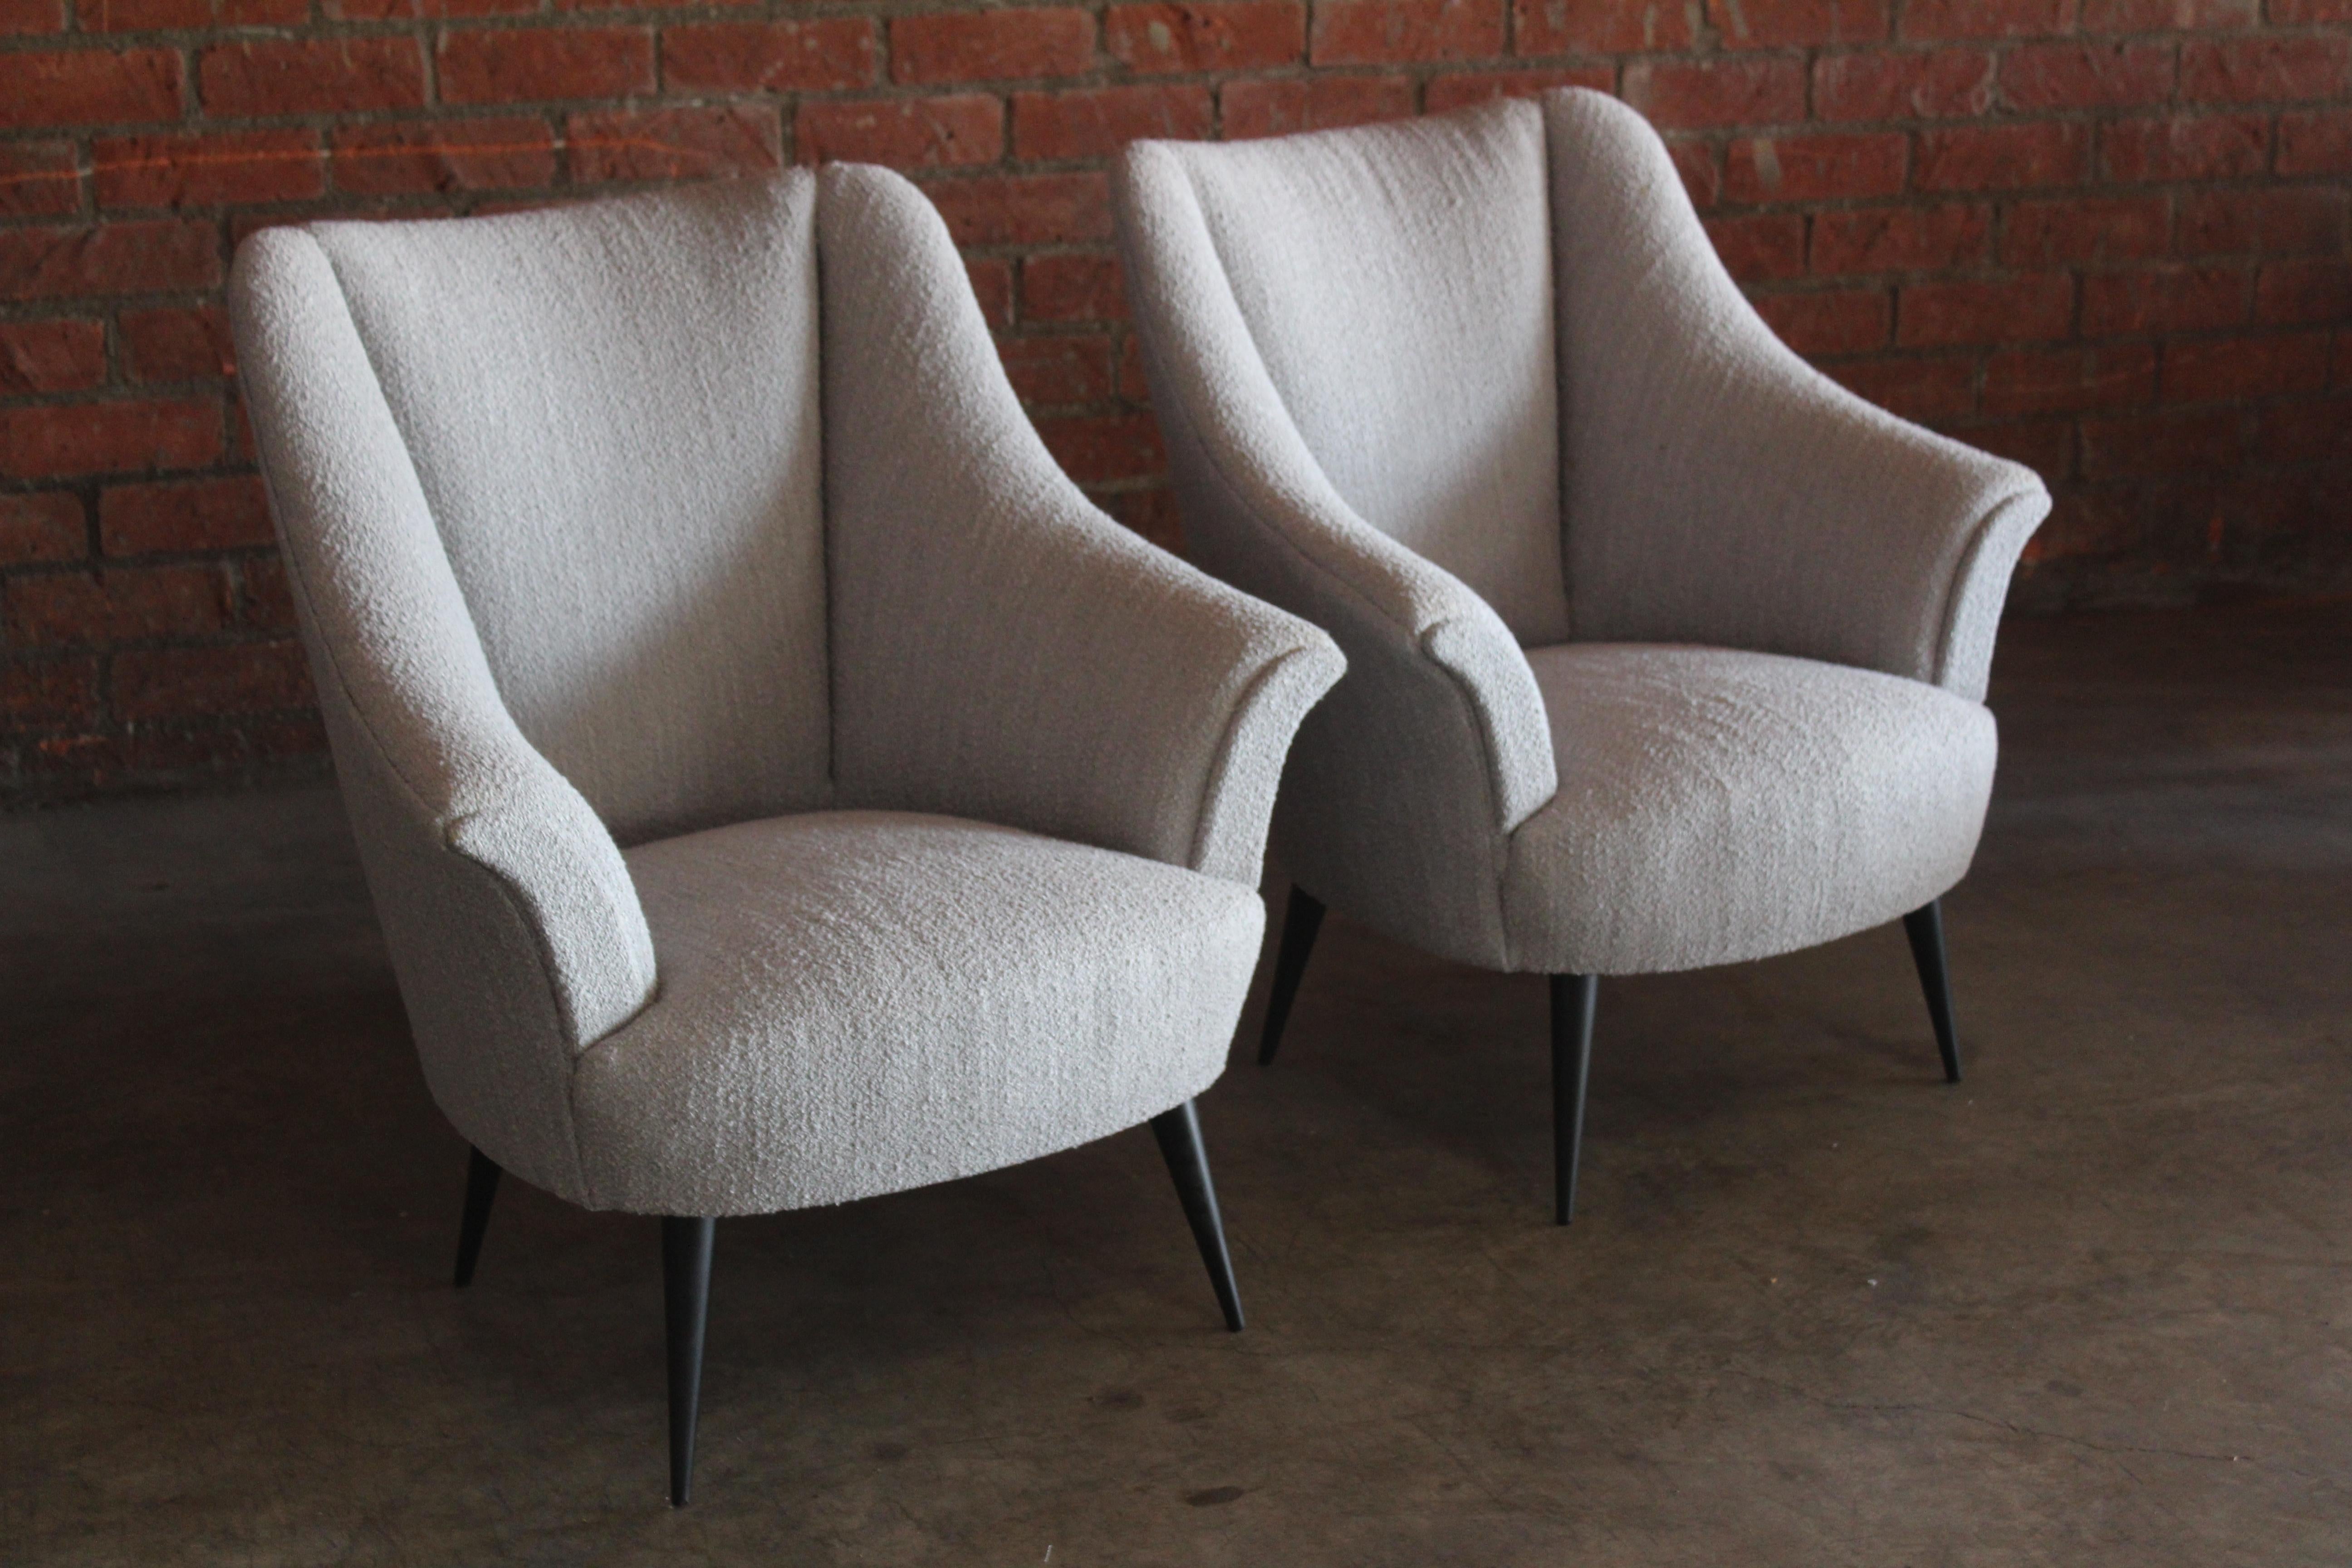 Pair of 1950s Italian armchairs completely restored and reupholstered in a light grey performance bouclé. The walnut legs have been refinished satin black. Overall the pair are in excellent condition. Sold as a pair.